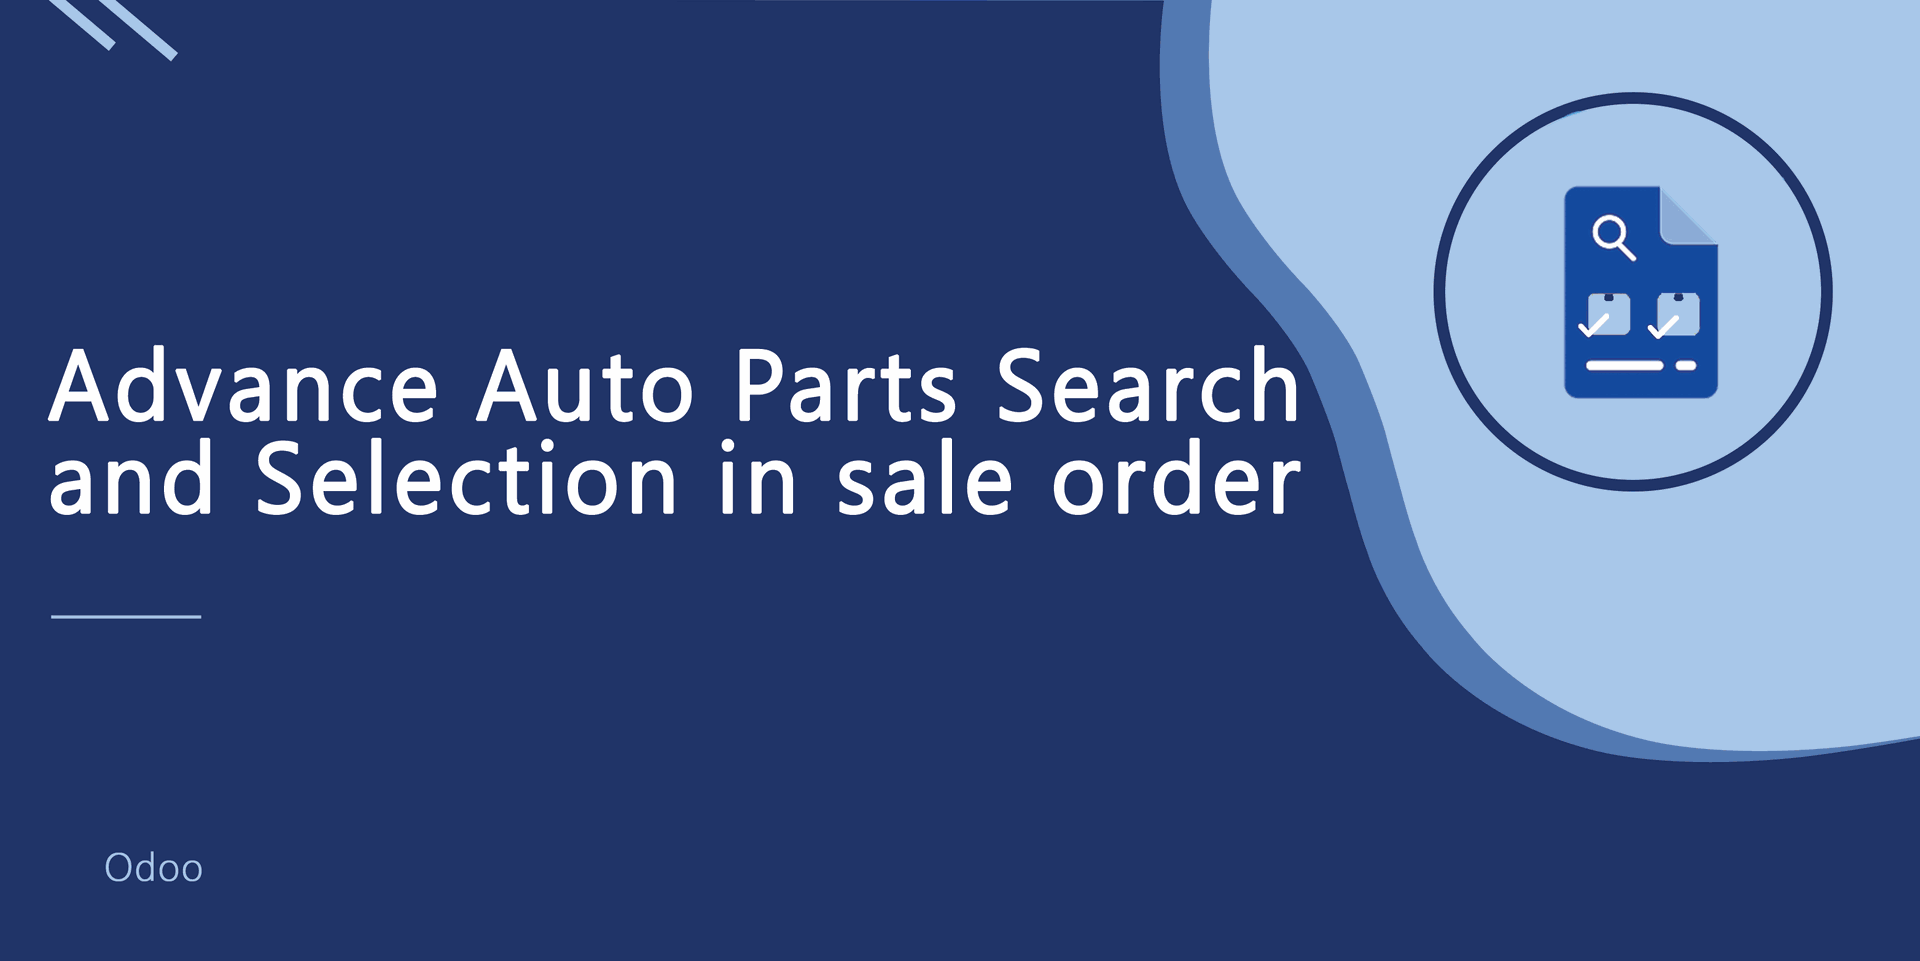 Advance Auto Parts Search and Selection in sale order